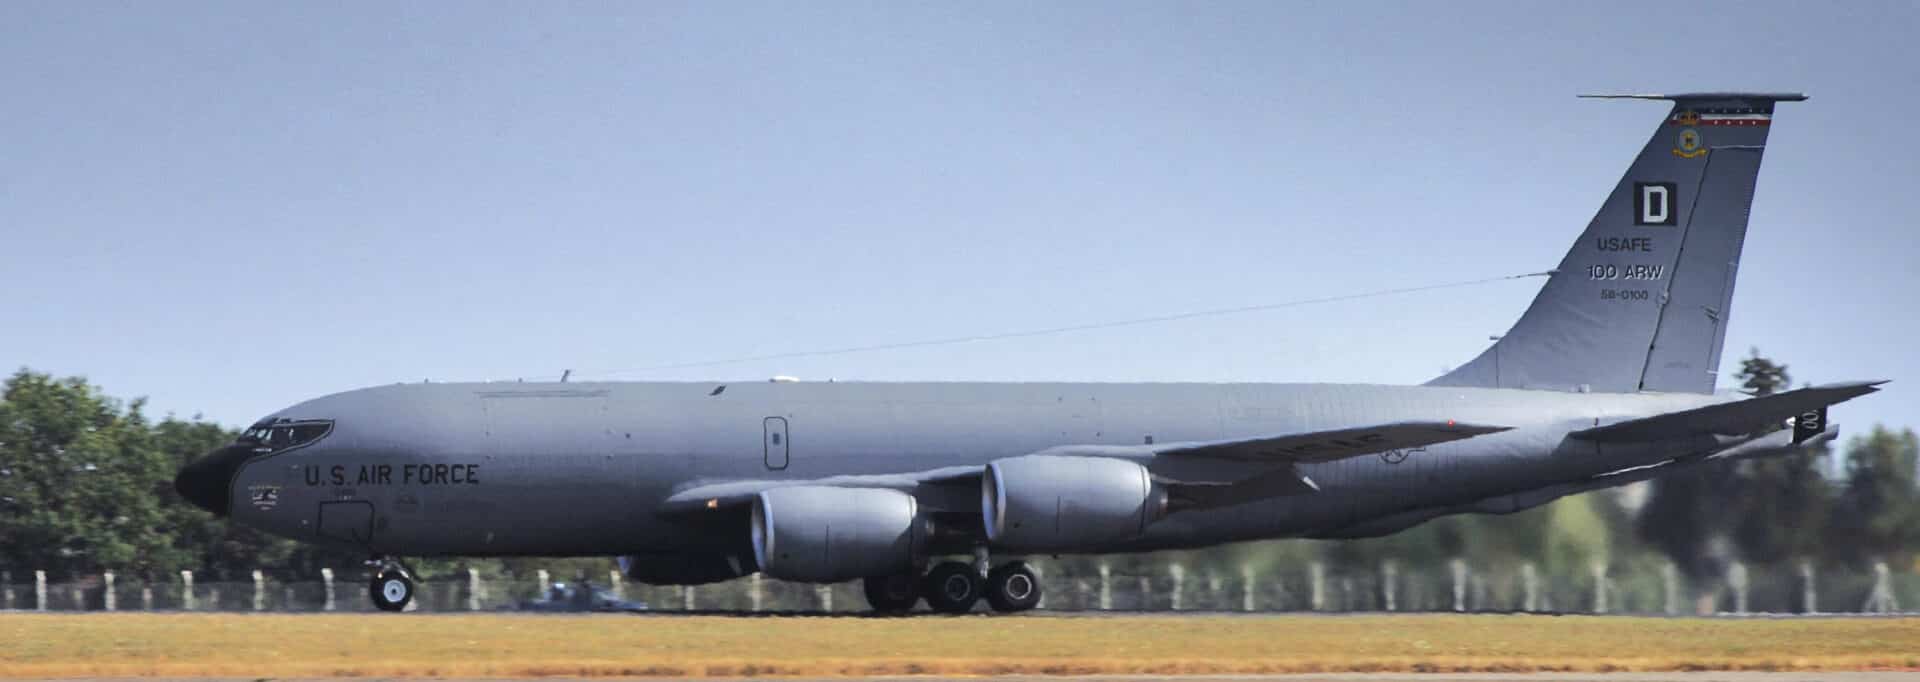 KC-135R/T Stratotanker aircraft taxiing at an airbase.